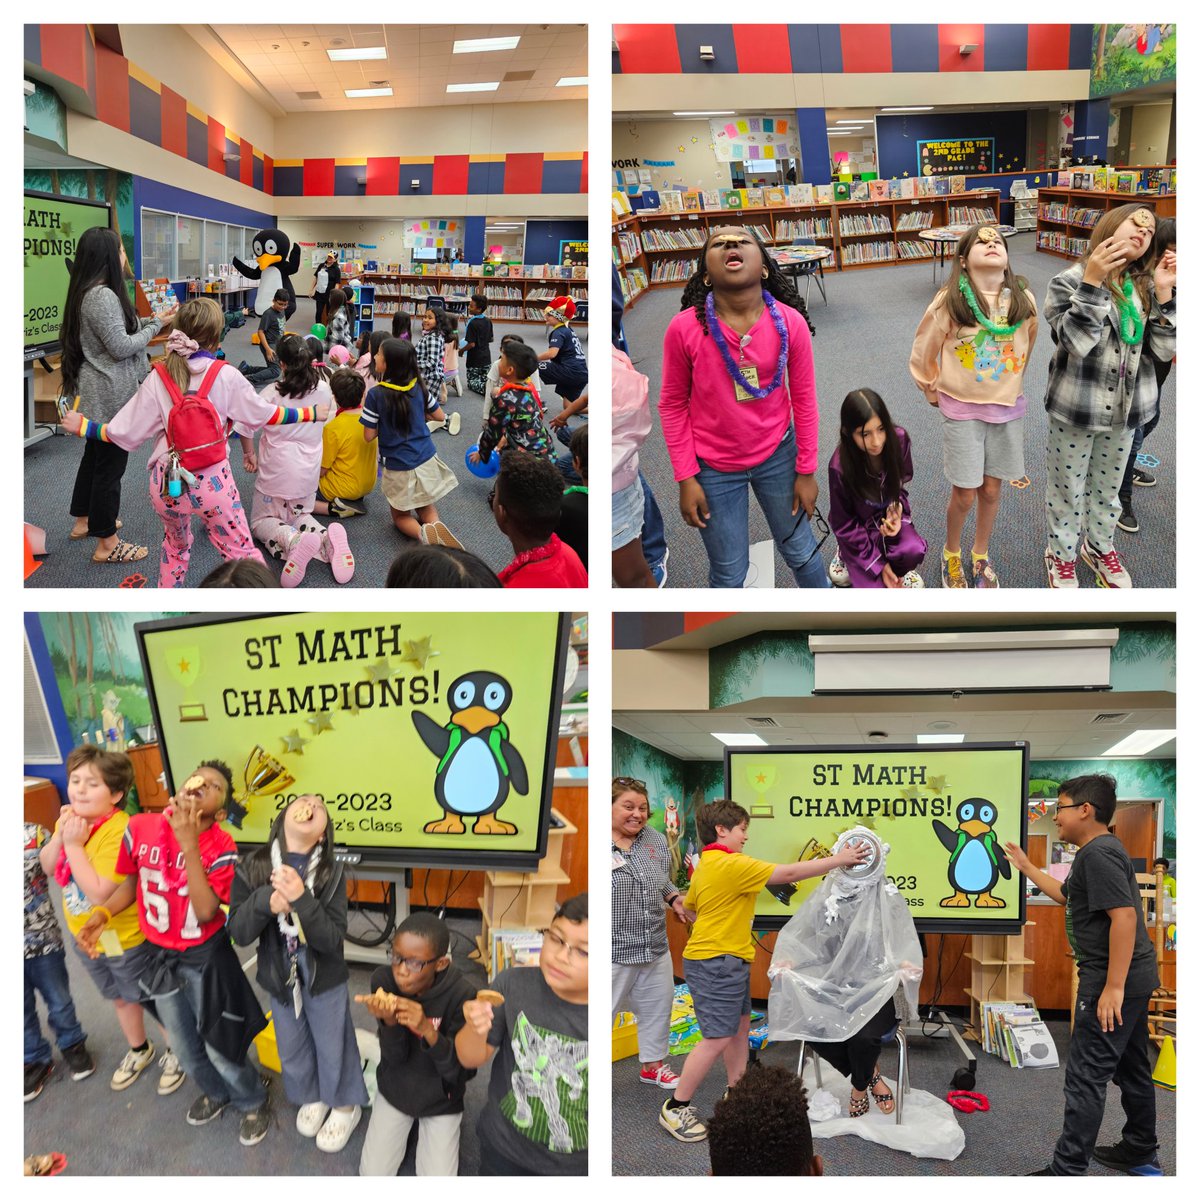 Our students are the #STMATH #Champions  Even #jiji stopped by. @STMath #mathpuzzle #mathfun #learning #fungames #pieintheface #EDU #TEACHers #danceparty @PostmaPumas